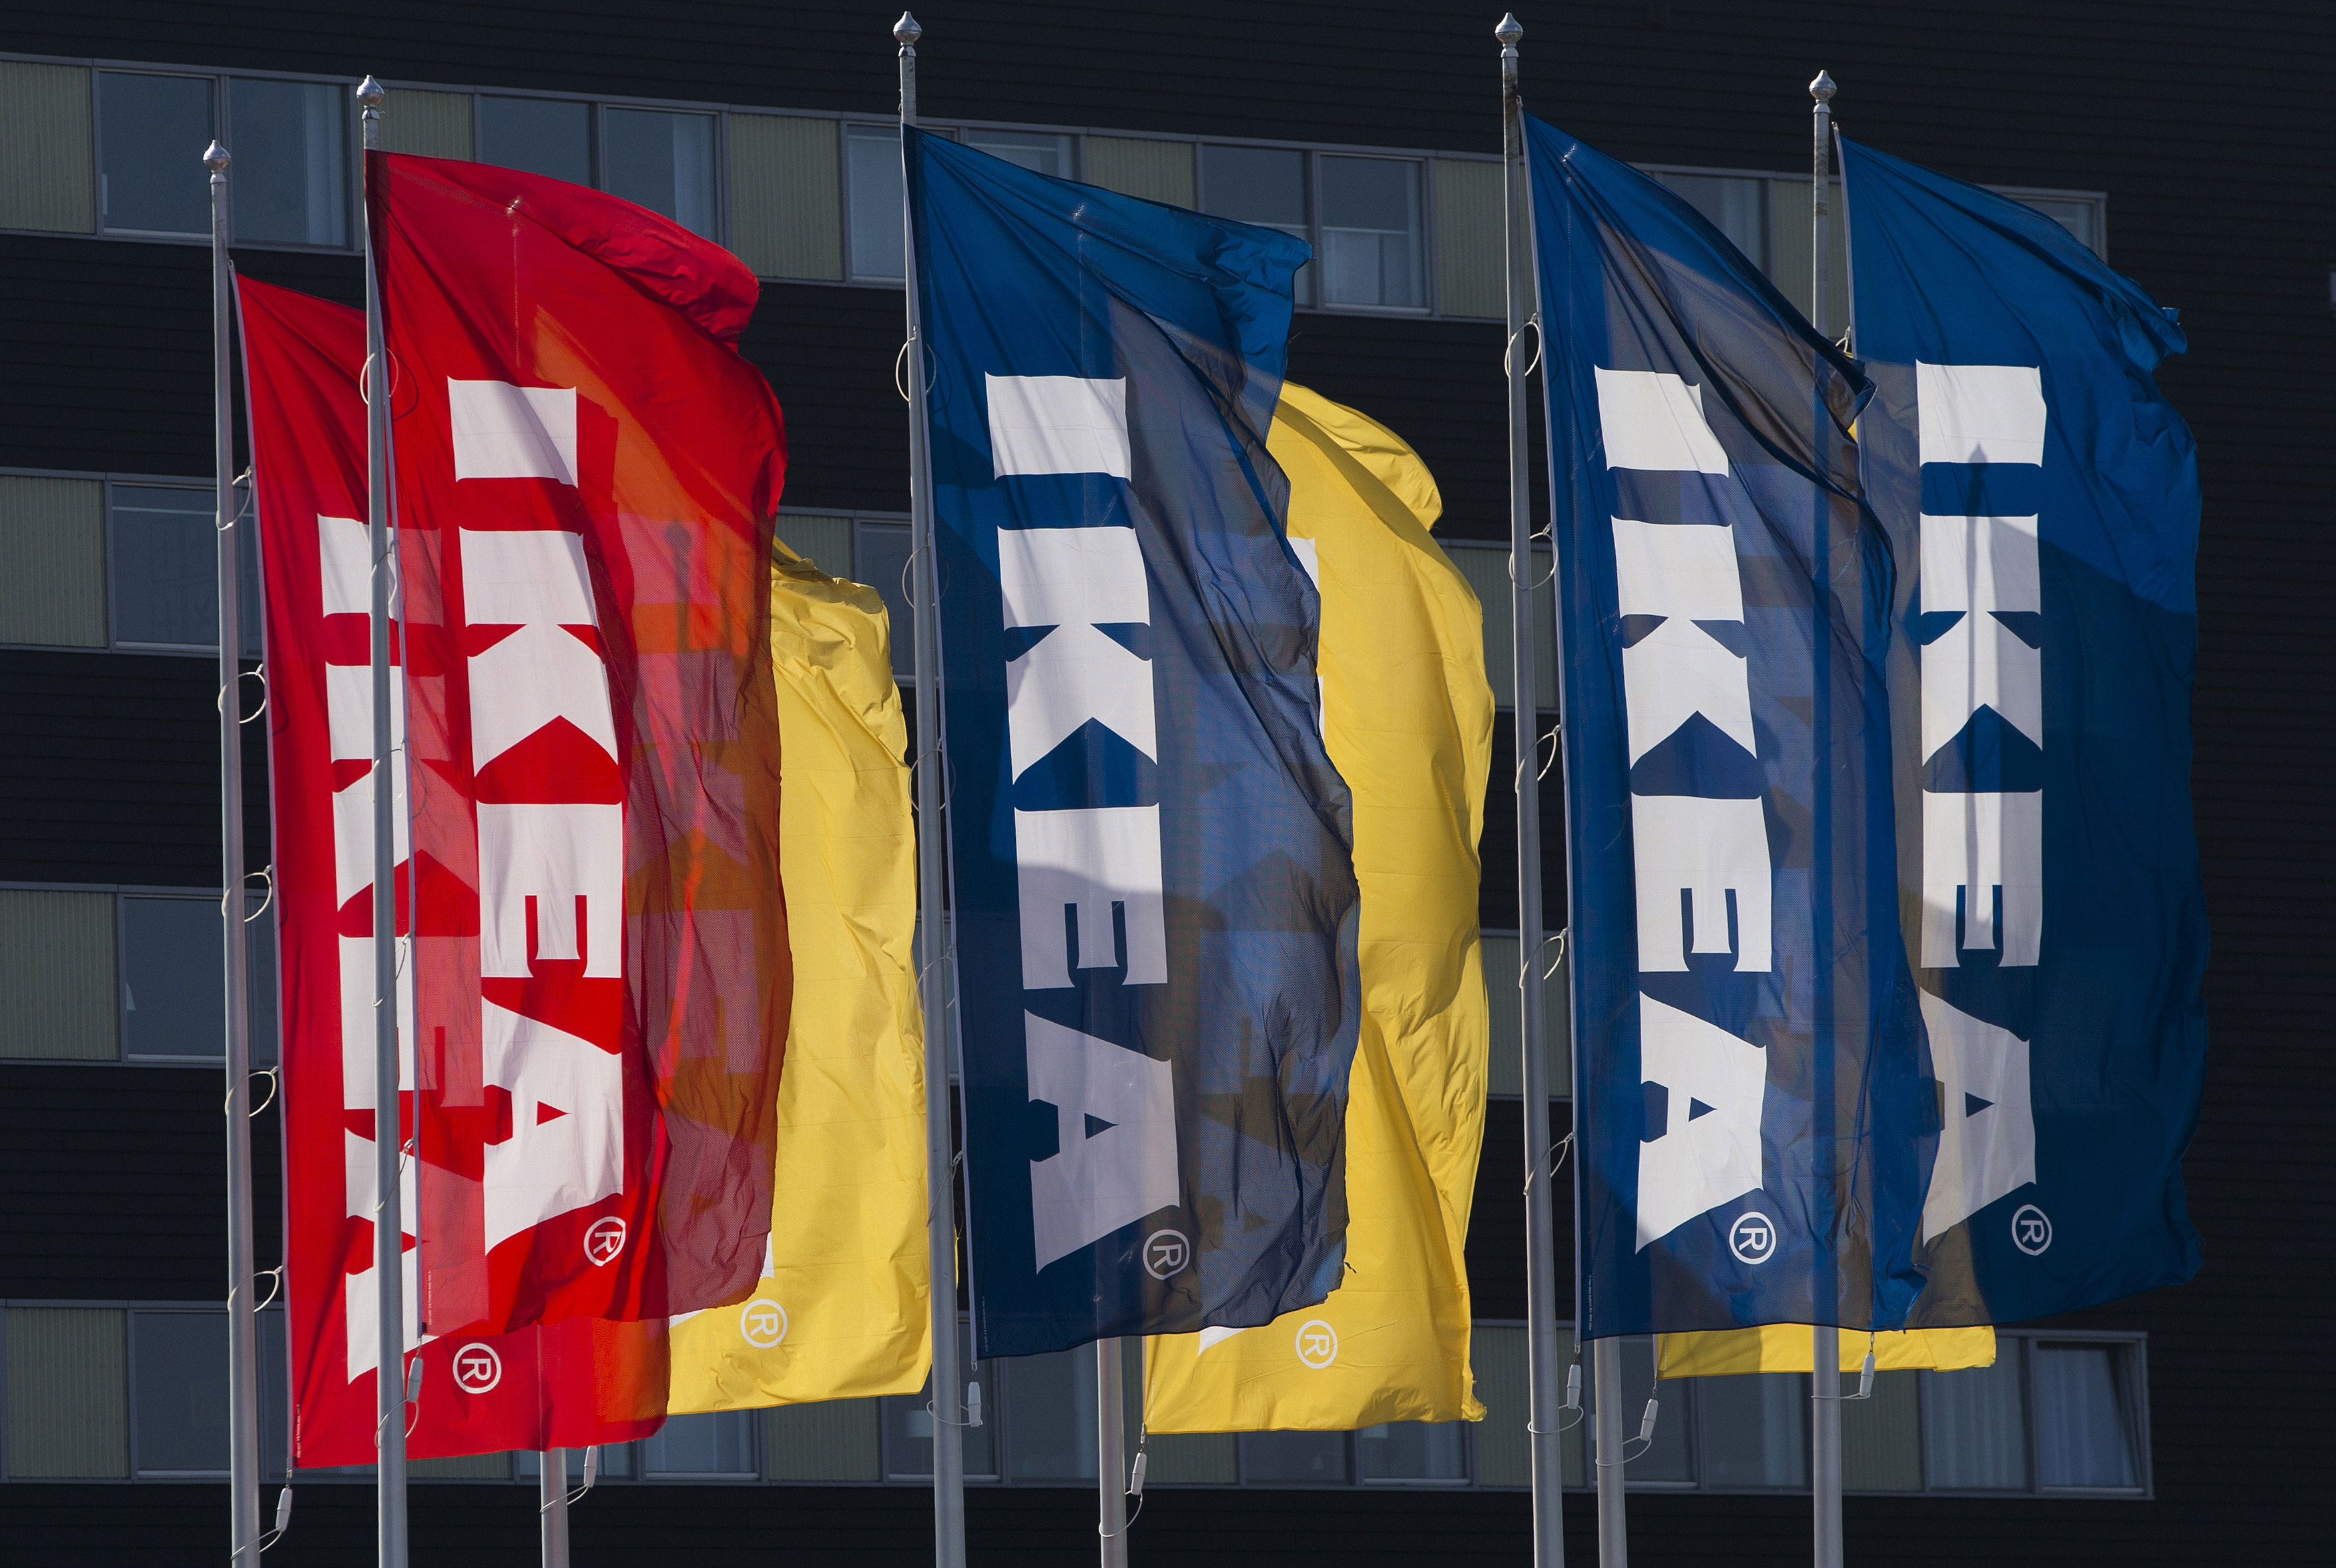 The IKEA logo is seen on flags outside the IKEA Concept Center in Delft